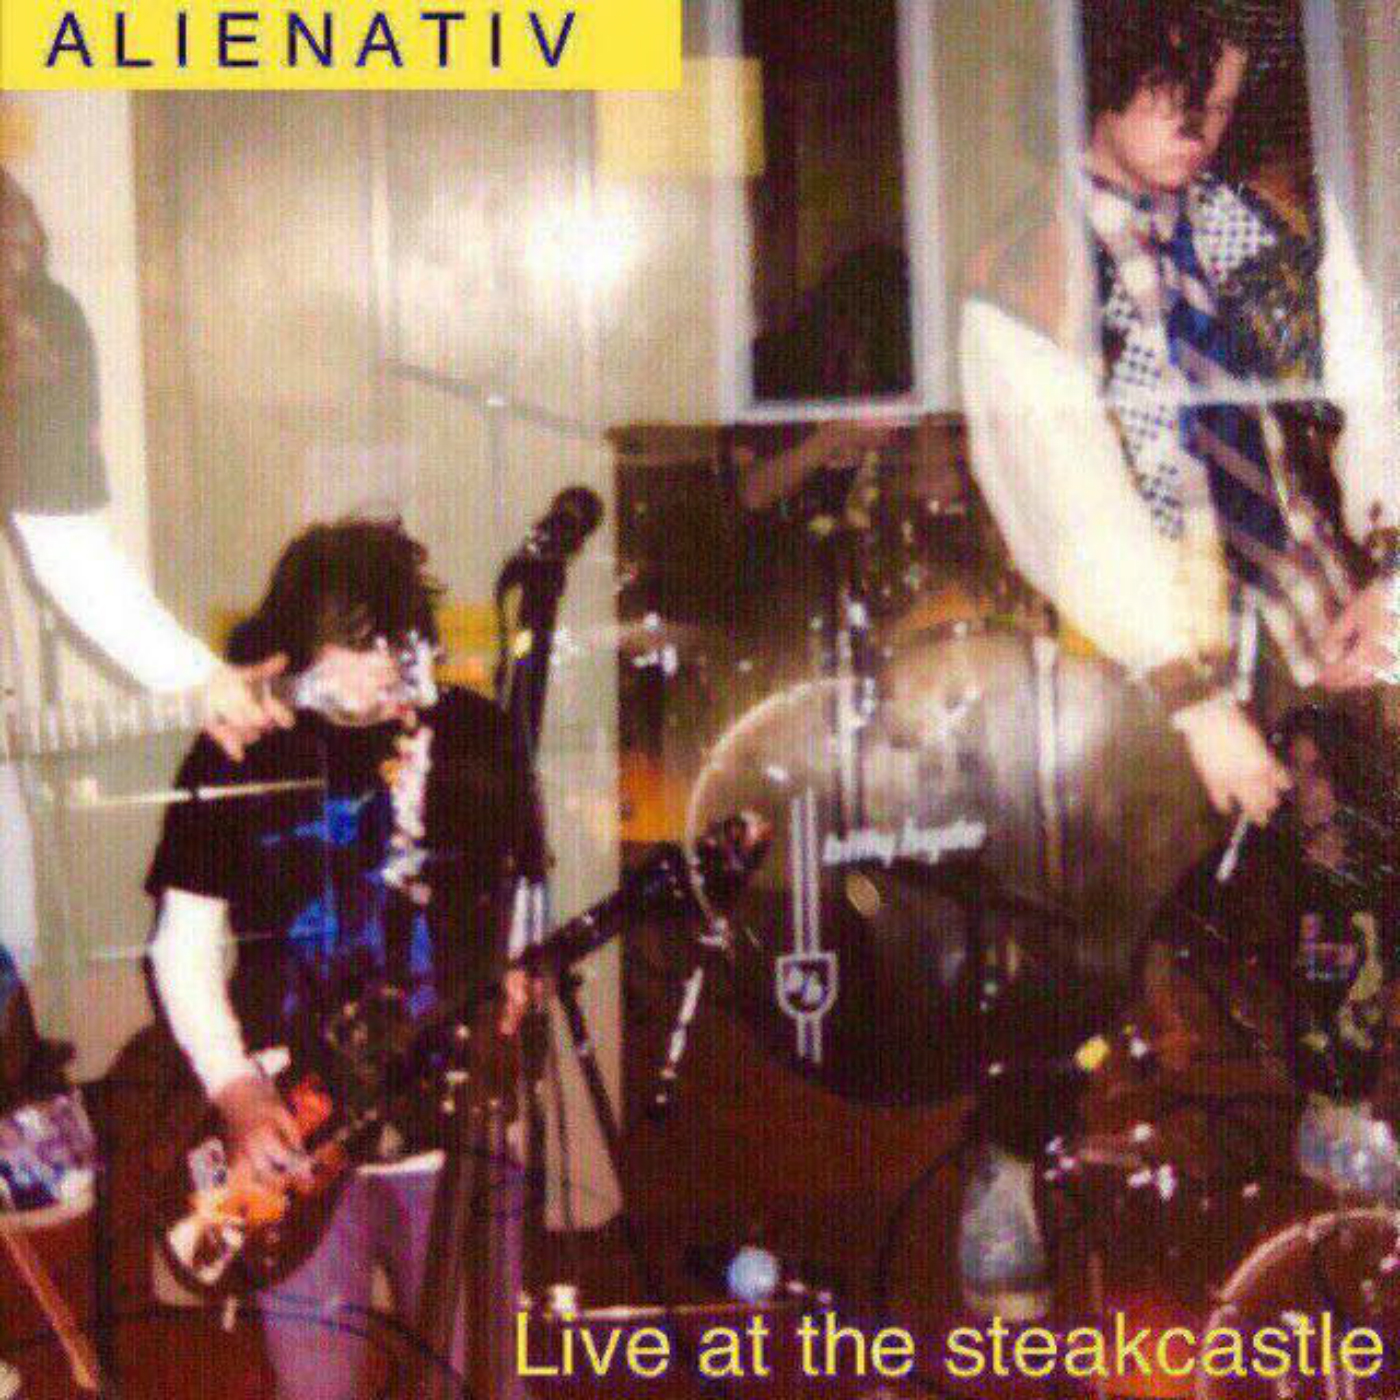 CD Review - 'Live At The Steakcastle' - blog post image 